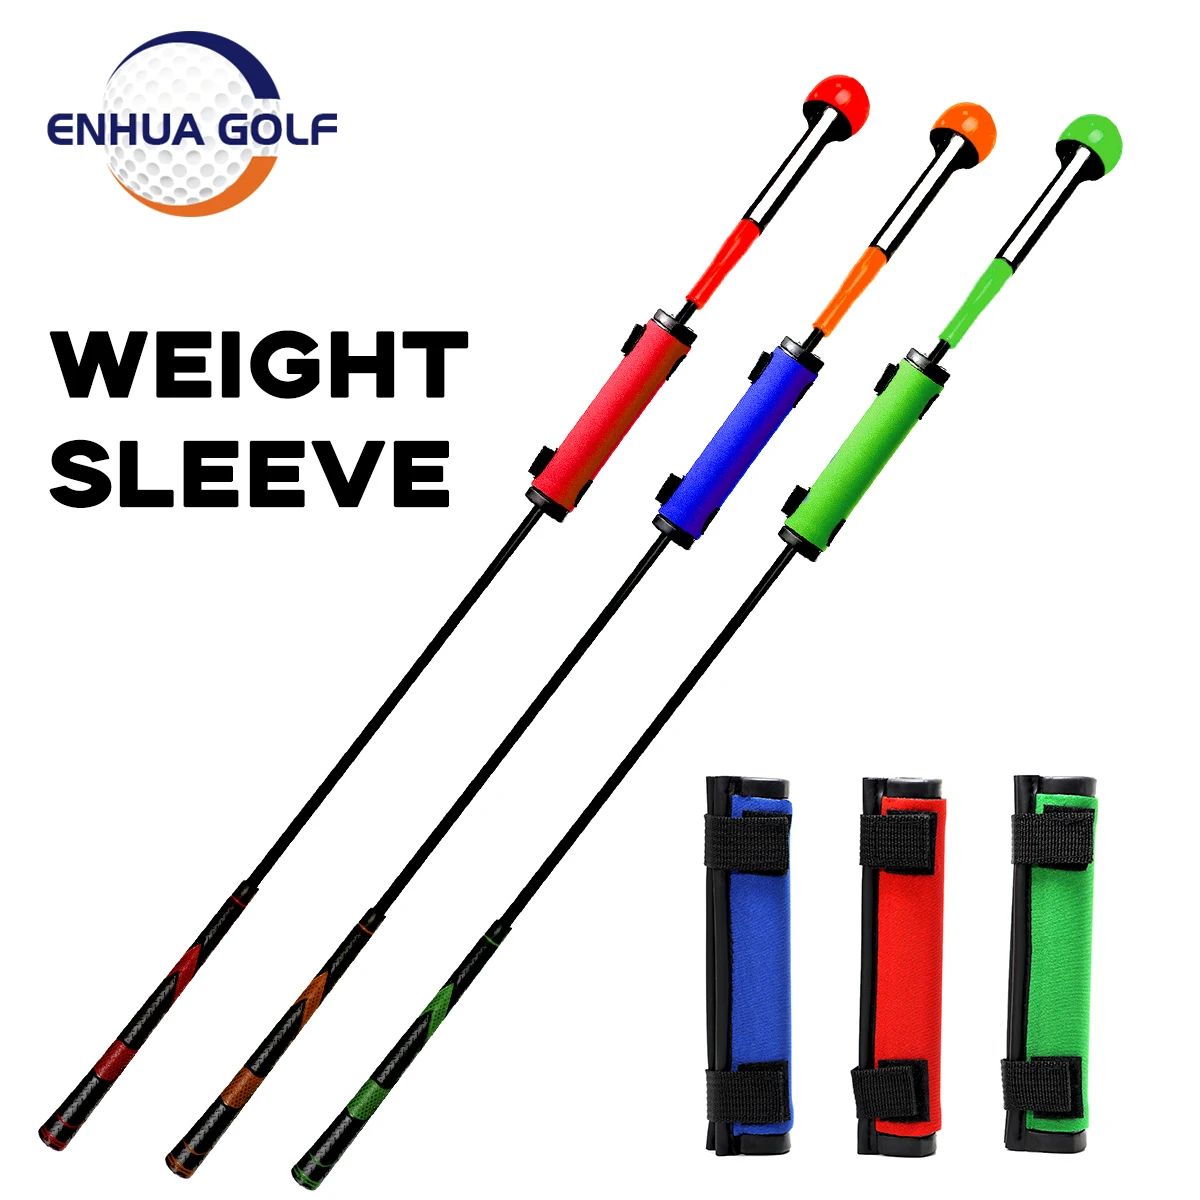 Golf Club Swing Weight Ring Warm Up Trainer Aid Golf Club Swing Weight Donut Weighted Ring Warm Up Trainer Red for Men Women